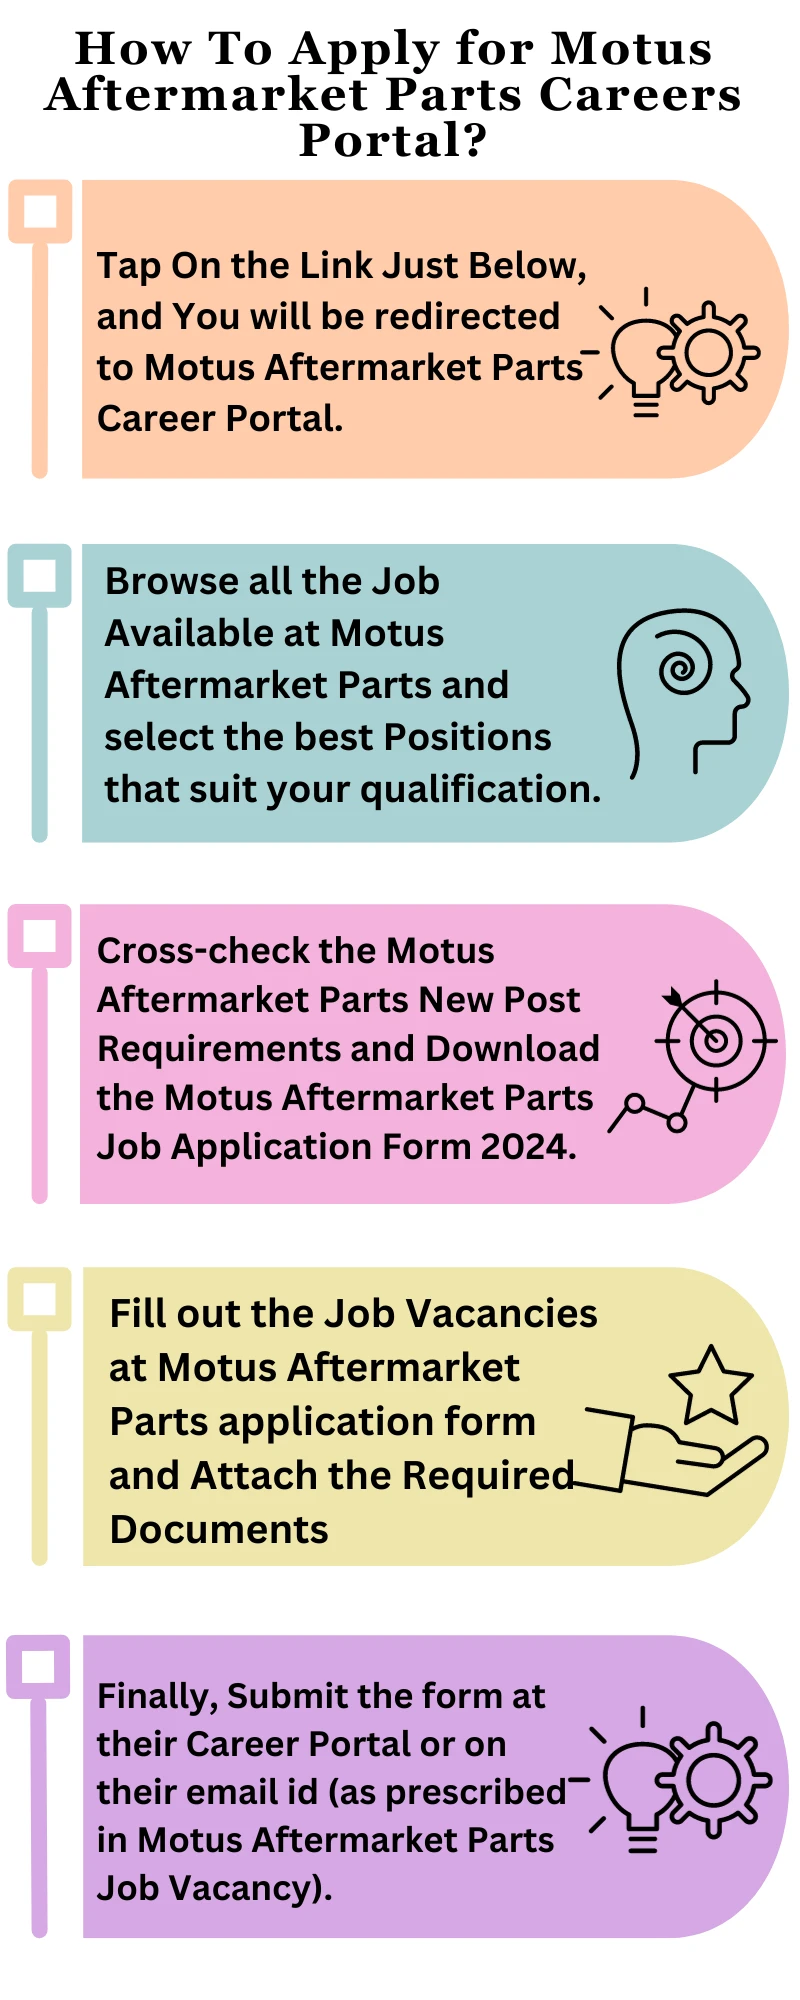 How To Apply for Motus Aftermarket Parts Careers Portal?